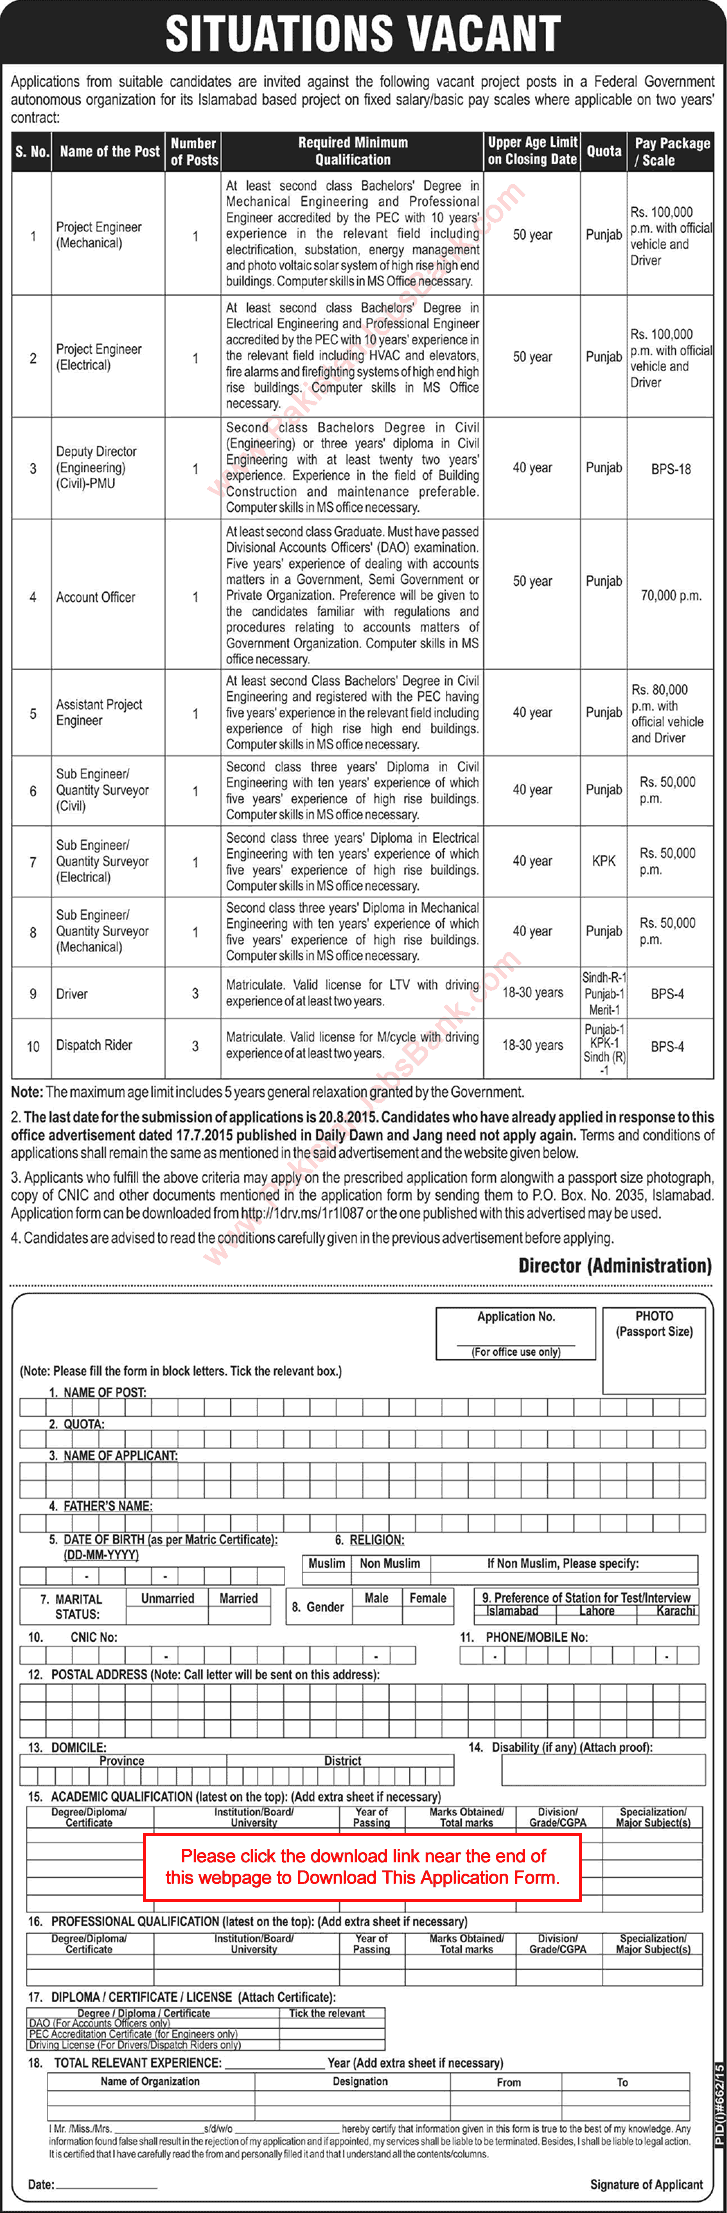 PO Box 2035 Islamabad Jobs 2015 August Application Form Engineers, Accounts Officer & Others